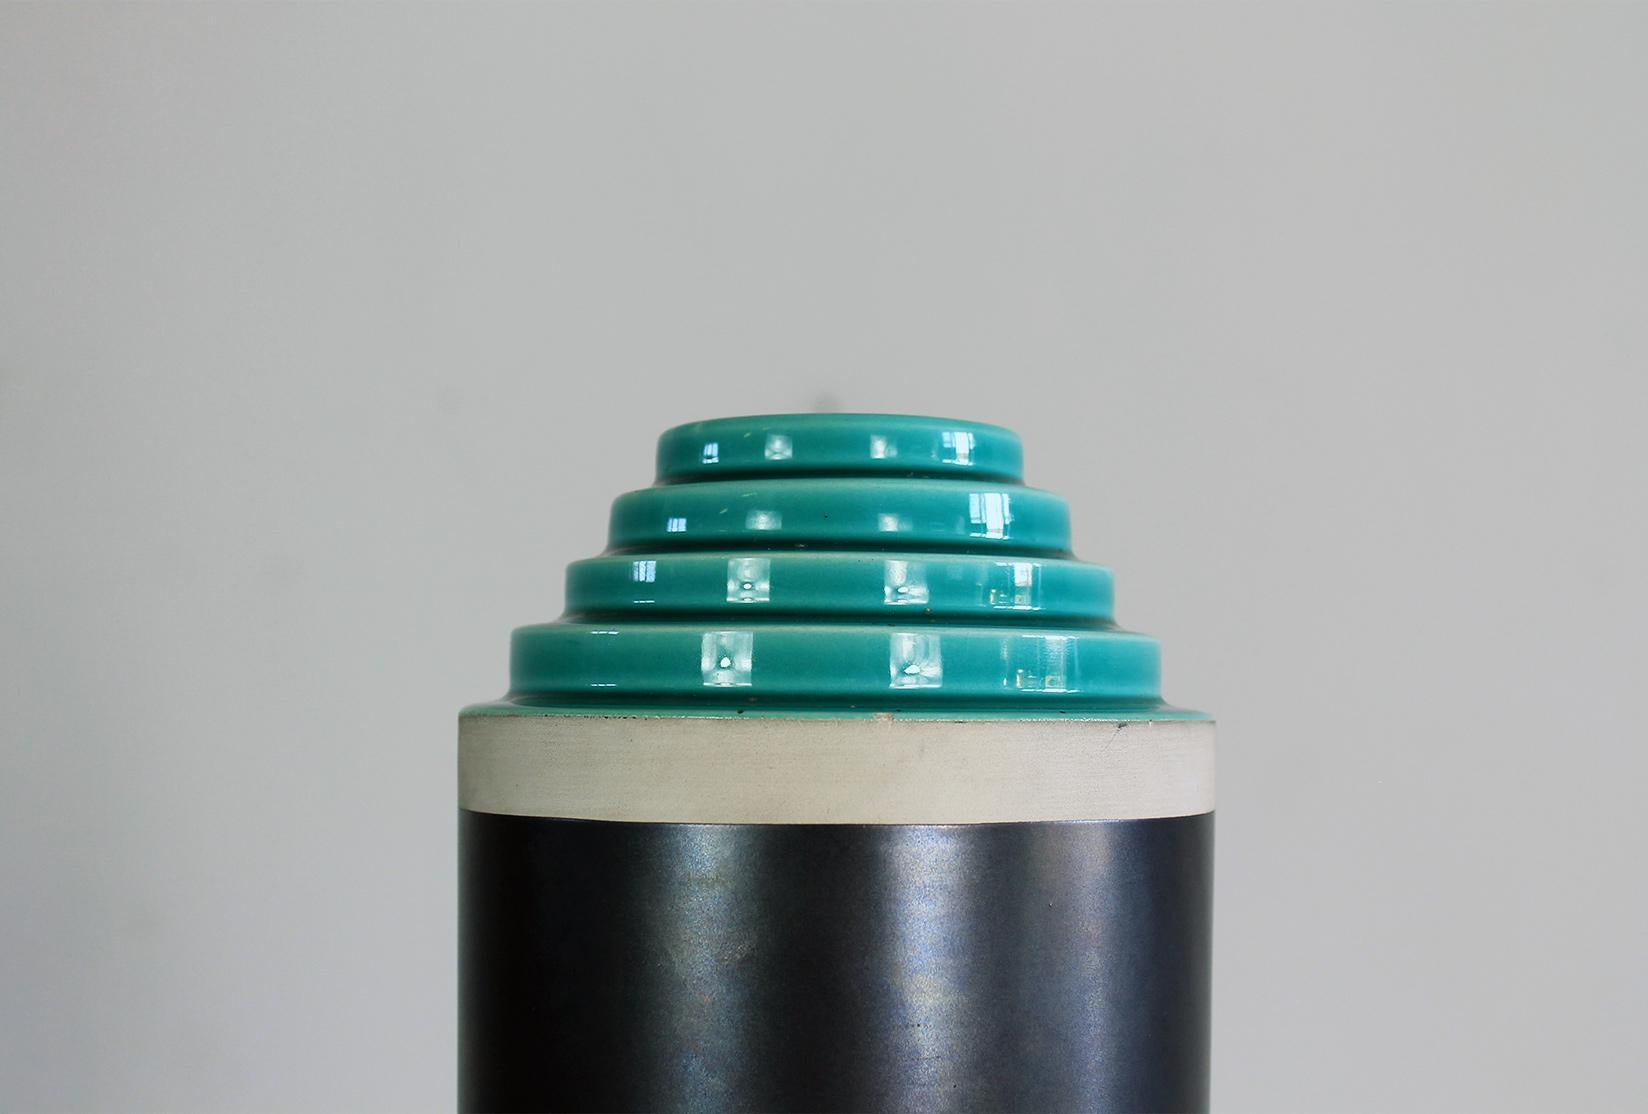 A vase from the stepped series in hand-turned in white clay enameled with two-tone matt gray and light green glaze, manufactured in the 1990s by Bitossi and designed by Ettore Sottsass Jr.

The stepped vases series was originally realized by Il